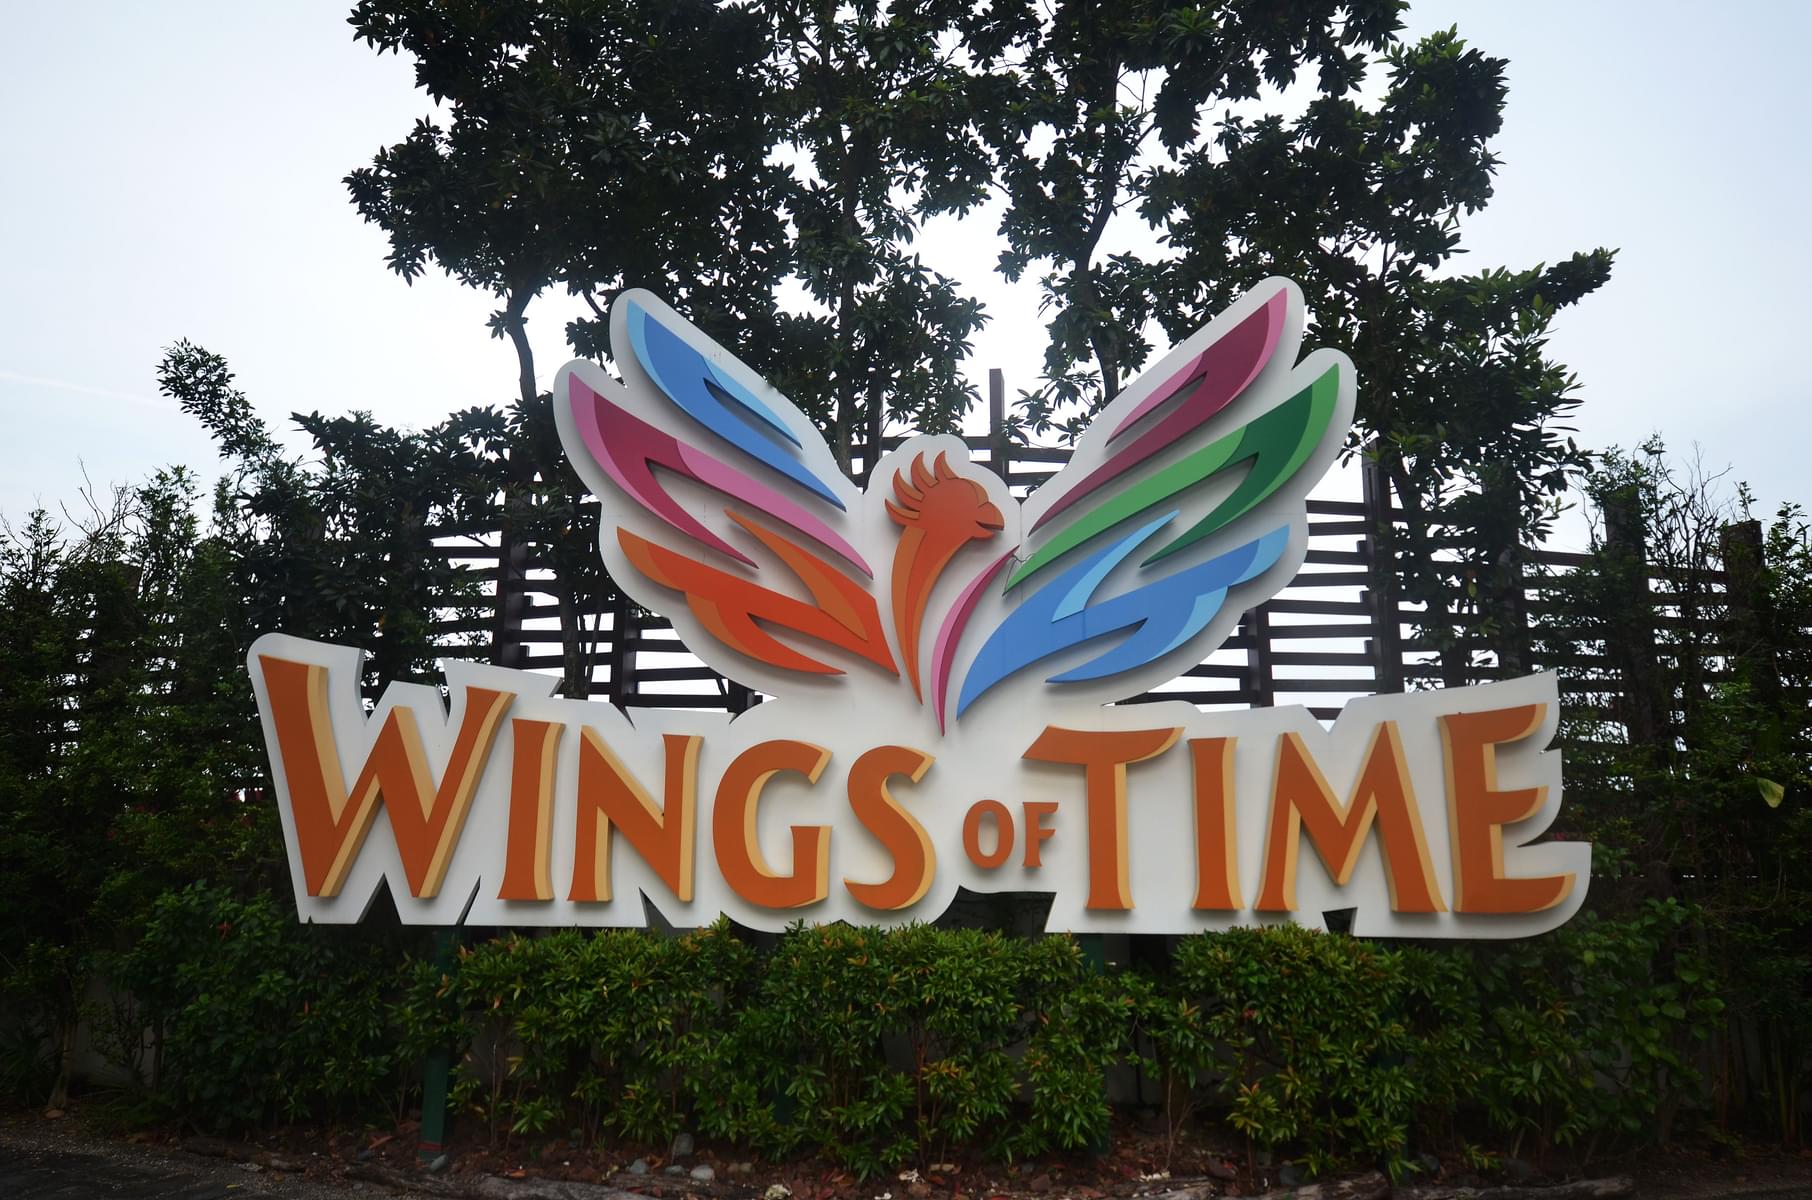 Singapore Wings of time 